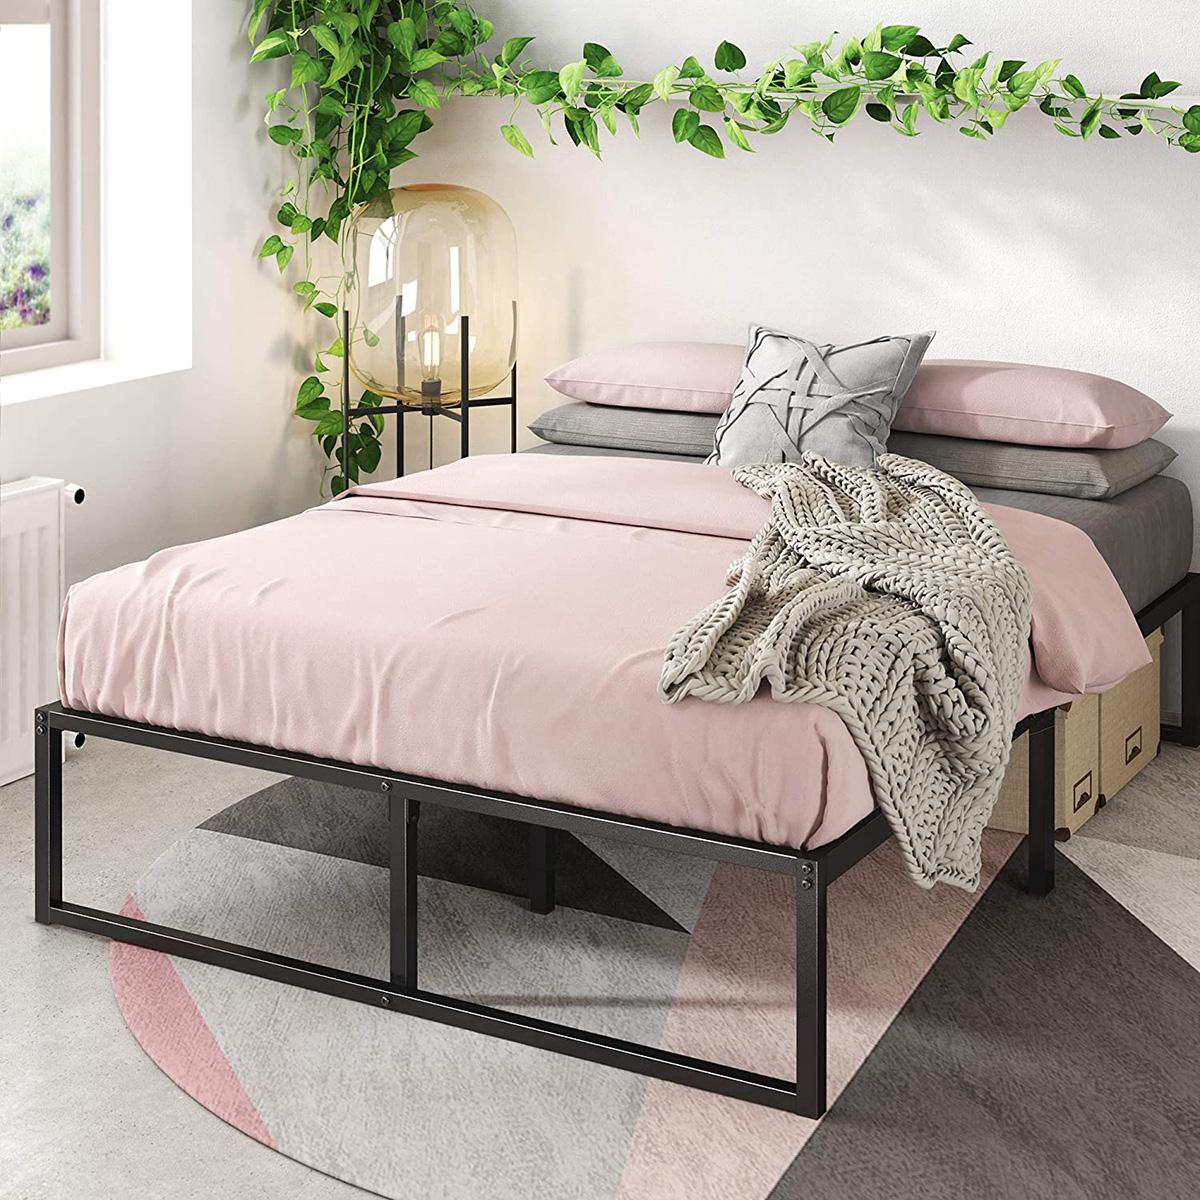 Zinus Lorelei 14in Platform Full Bed Frame for $52.25 Shipped